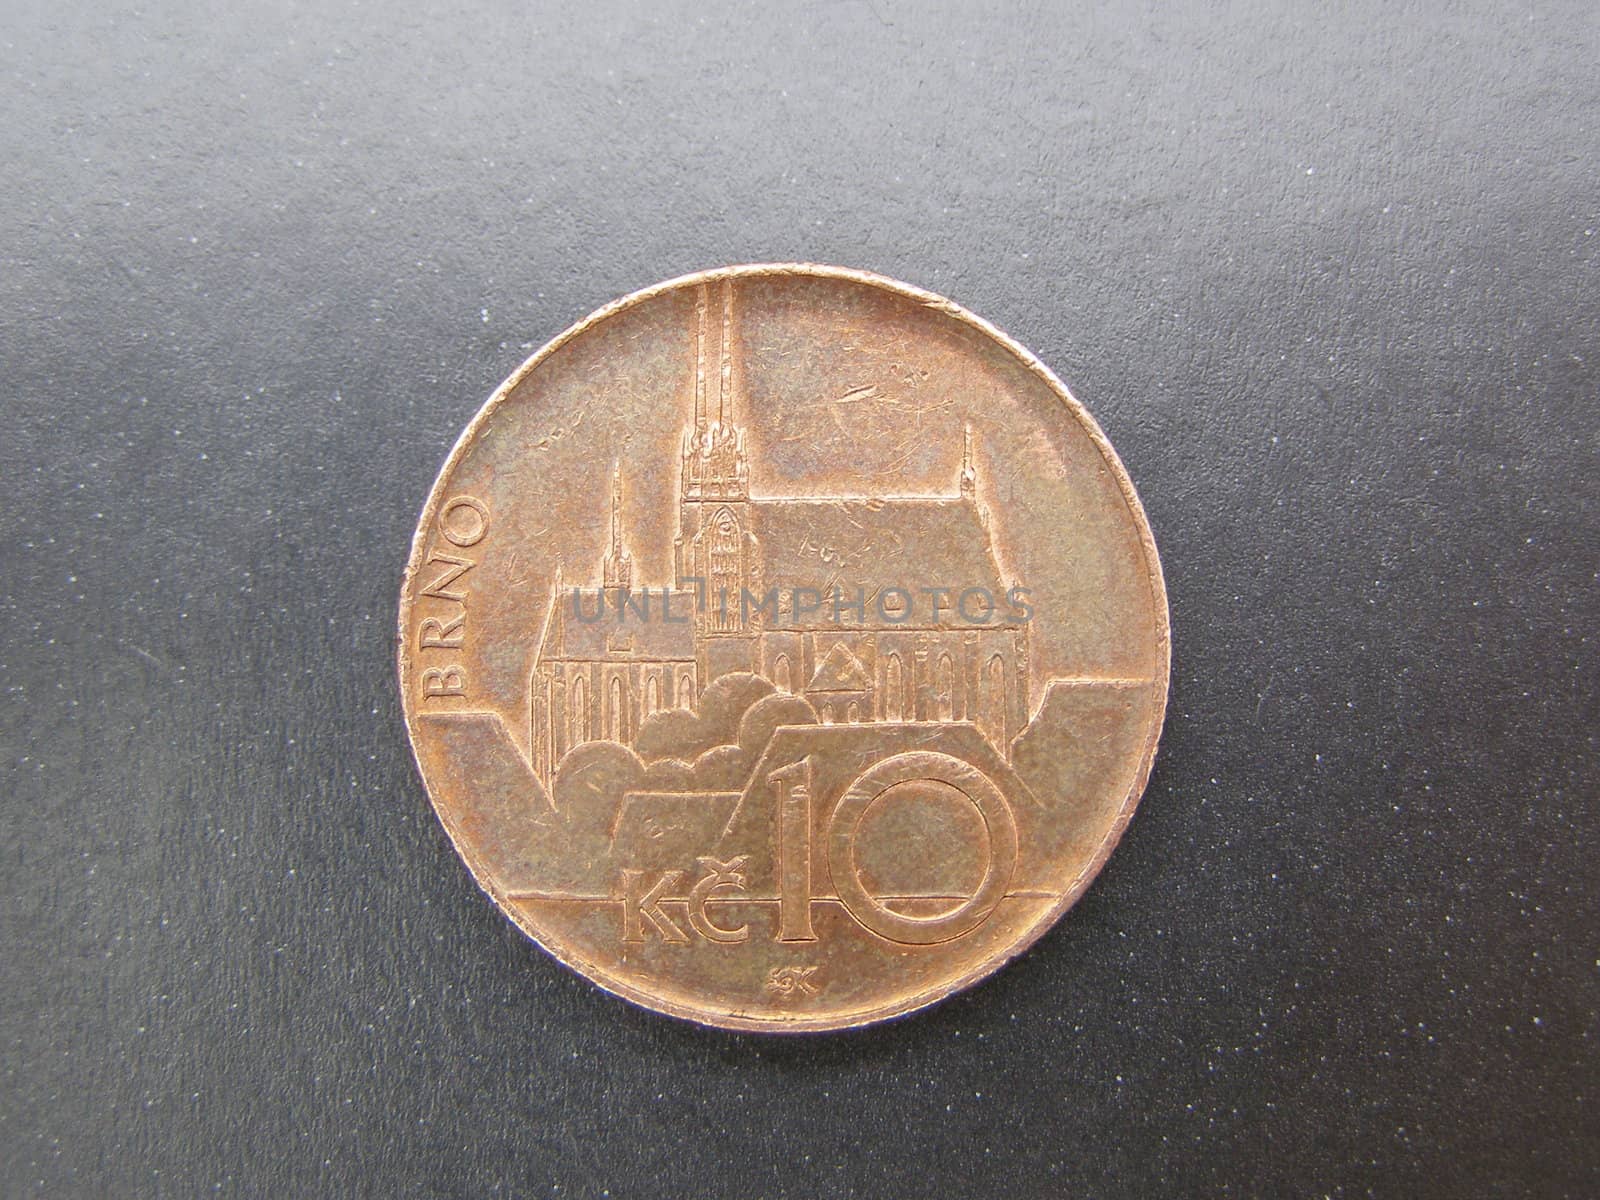 10 koruna Czech coin with Brno cathedral depicted on it